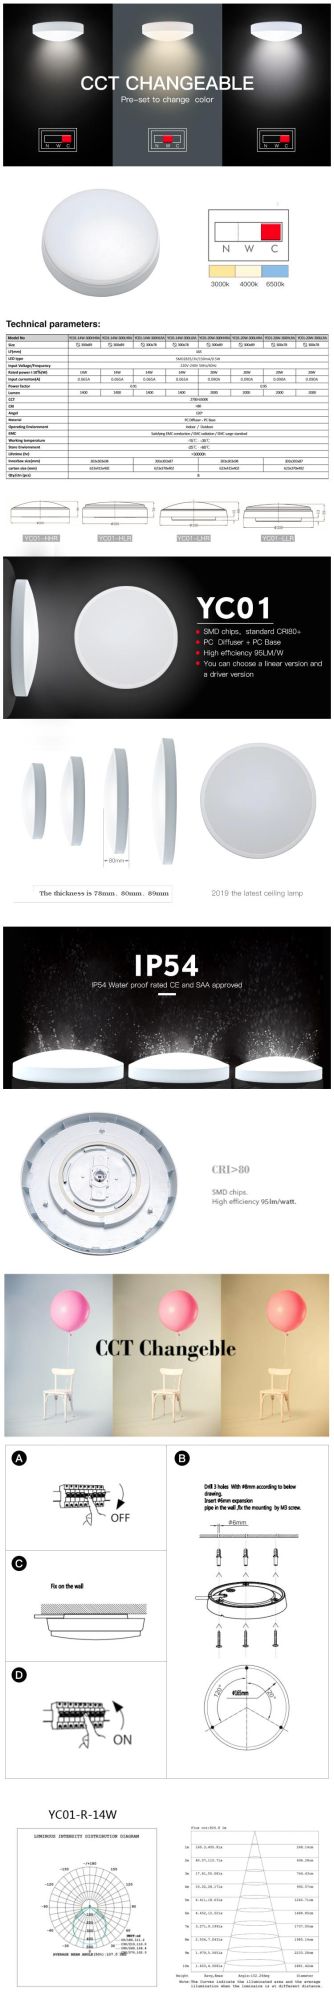 Customizable Yc01 Lighting Fuxture LED Ceiling Lamp with Good Service